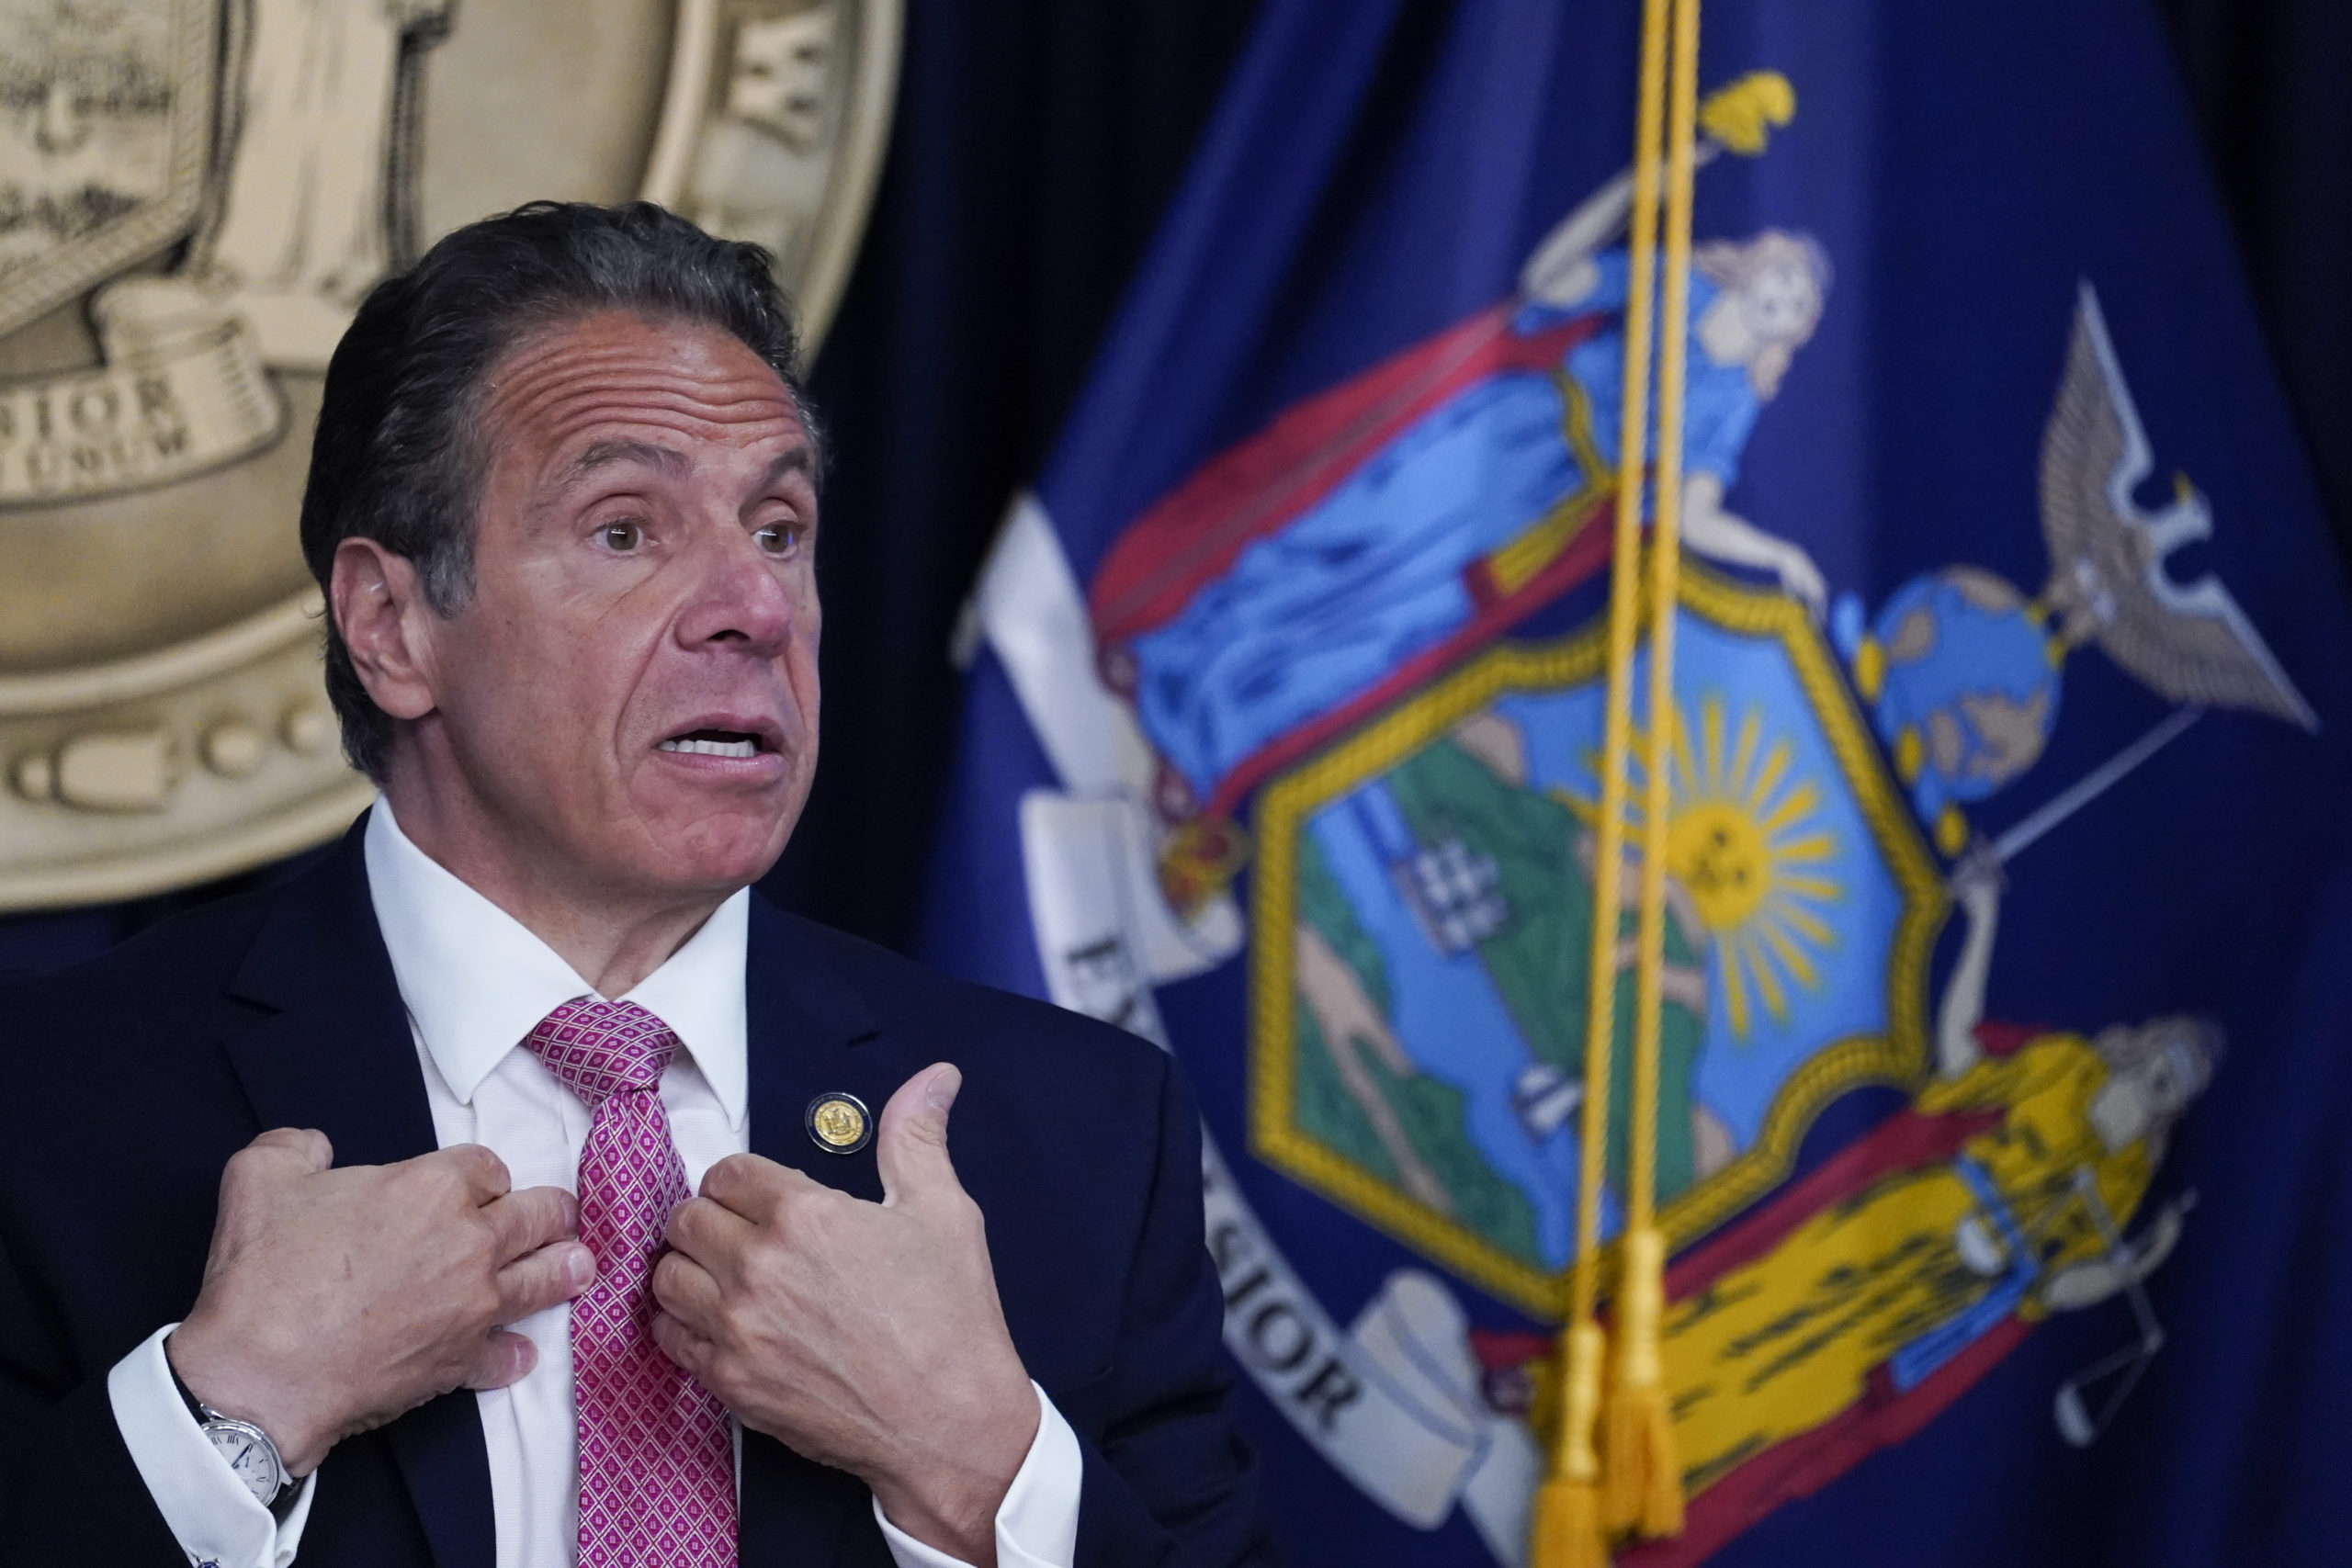 New York Gov. Andrew Cuomo speaks during a news conference on May 10, 2021 in New York City. (Photo by Mary Altaffer-Pool/Getty Images)